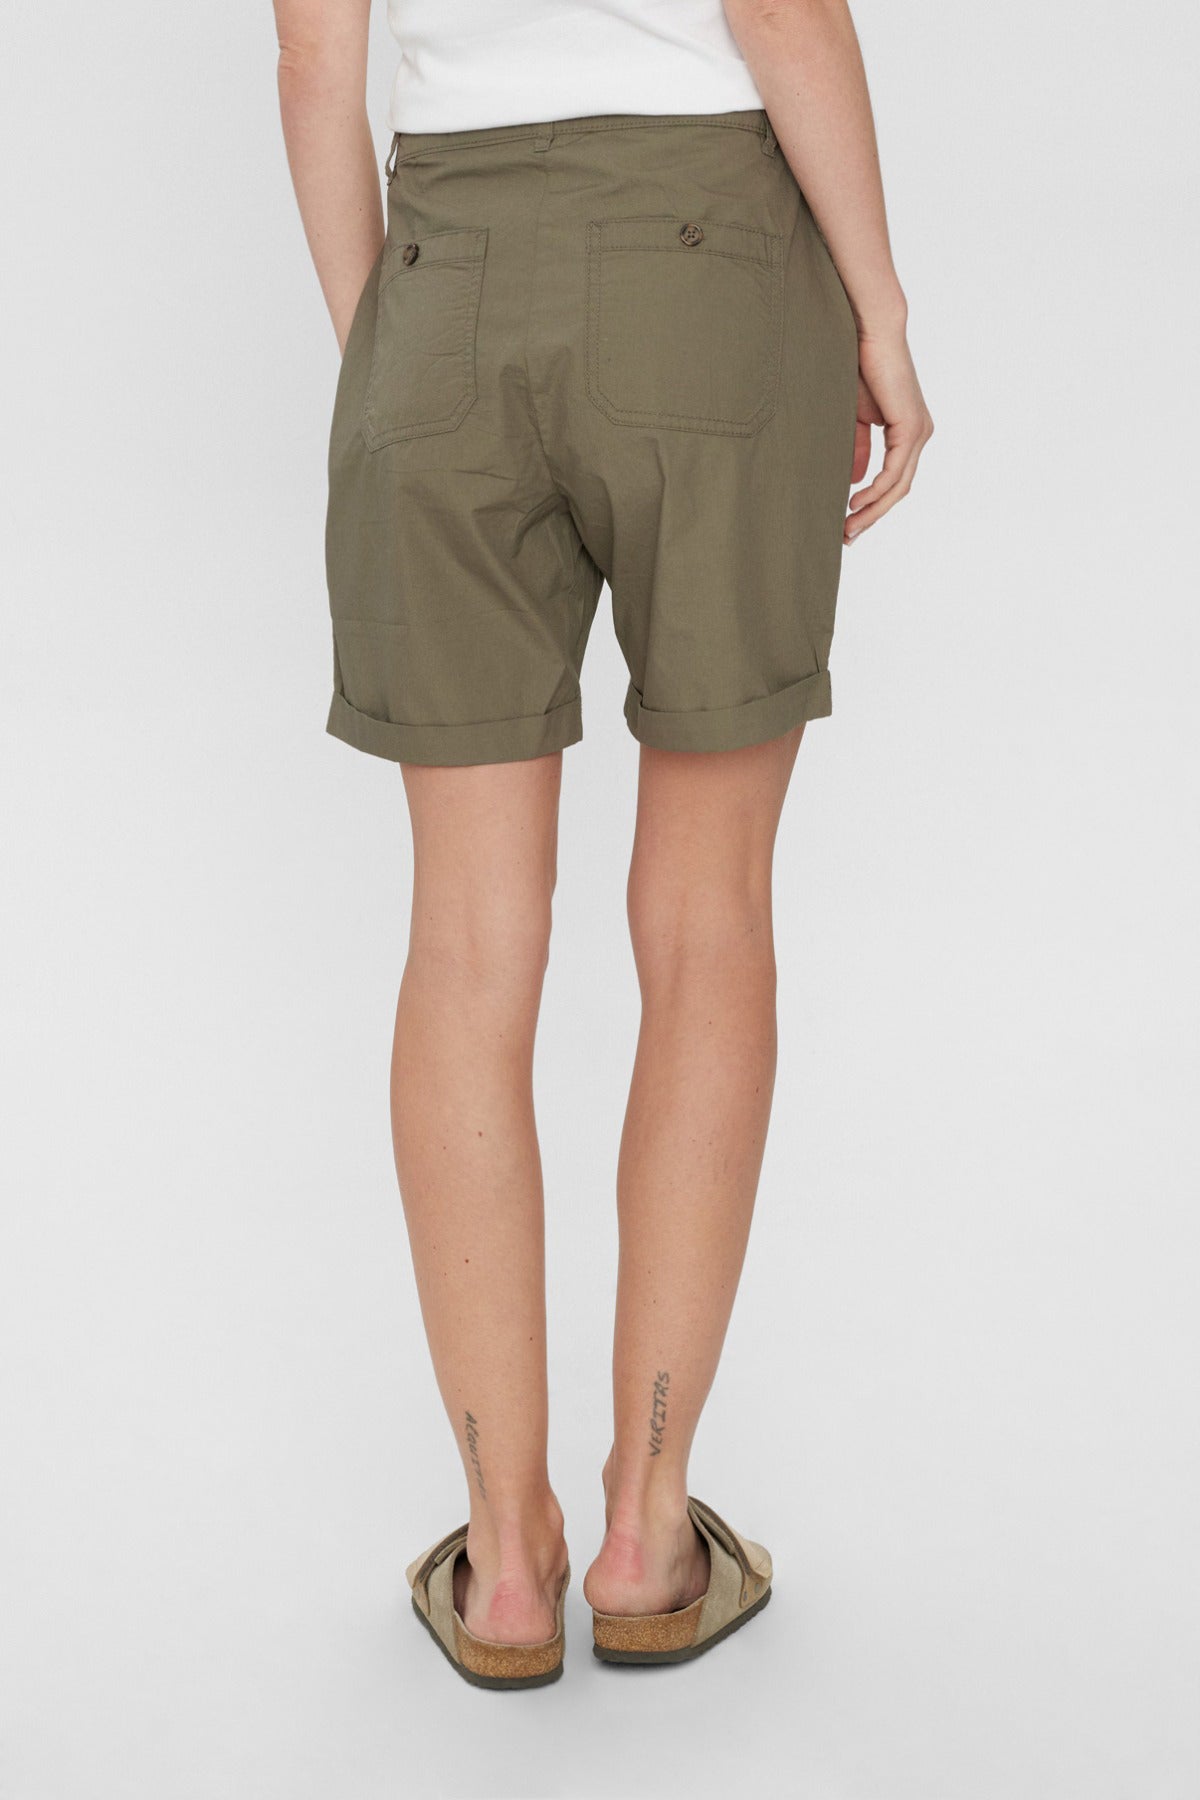 THERESE Shorts Nelly 9811